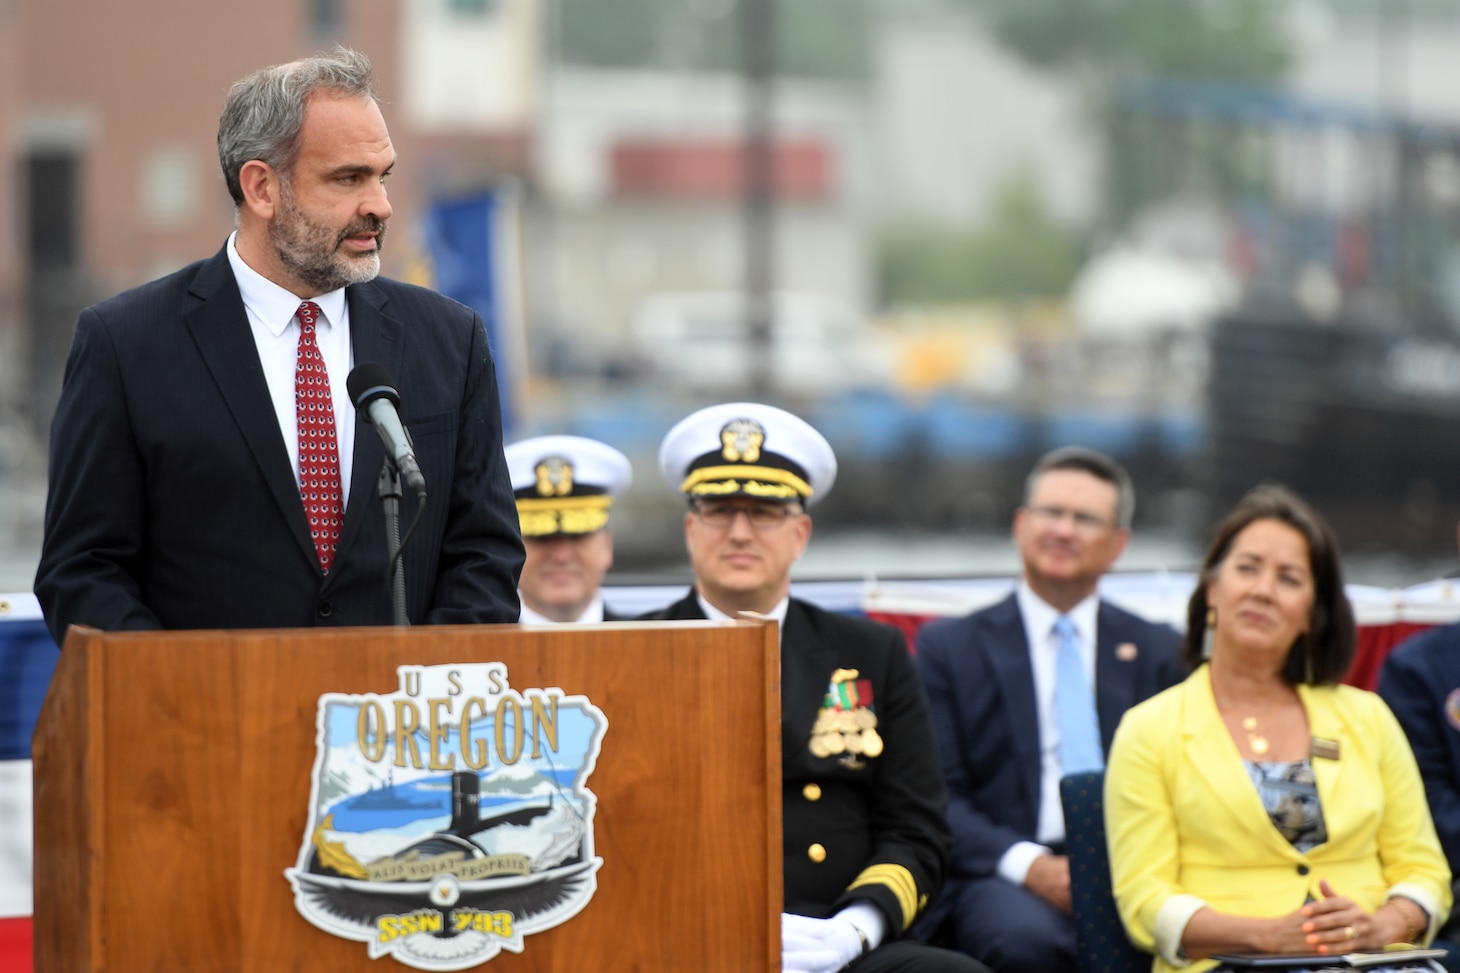 Tommy Ross, performing the duties of Assistant Secretary of the Navy for Research, Development, and Acquisition, delivers remarks during a commissioning ceremony for the Virginia-class fast attack submarine USS Oregon (SSN 793) in Groton, Conn., May 28, 2022.